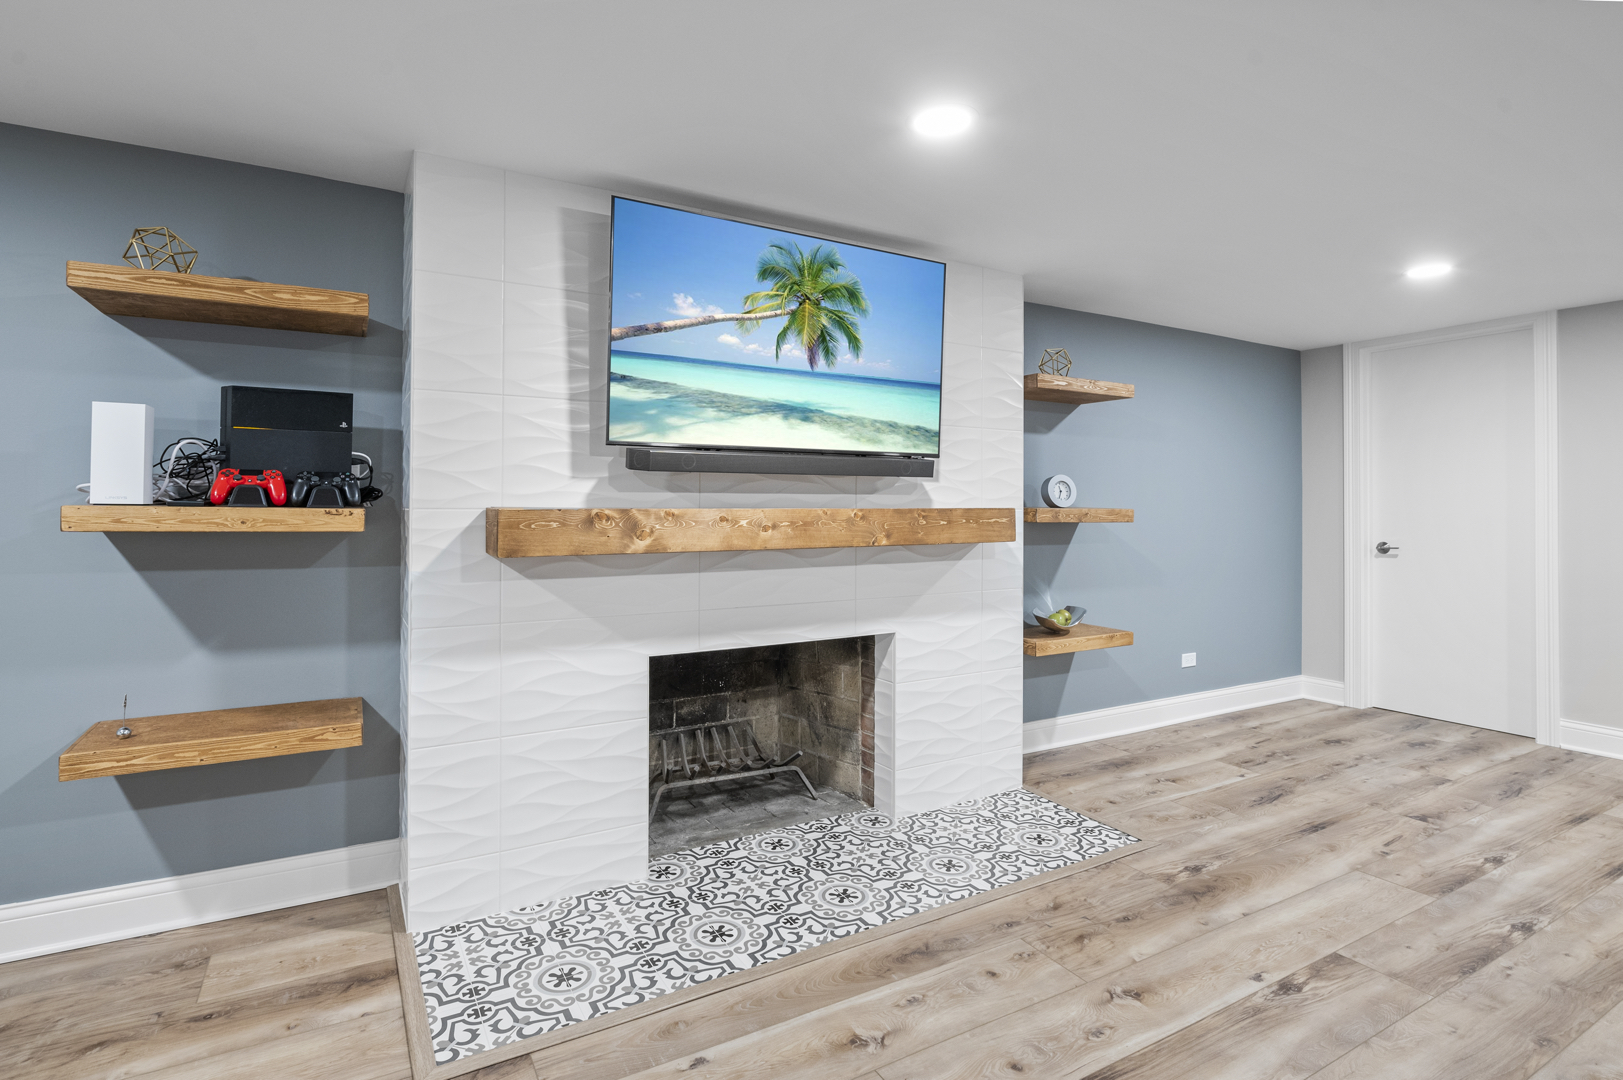  Image of hanging shelves, fireplace, and mounted TV as part of full basement remodel in Chicago.